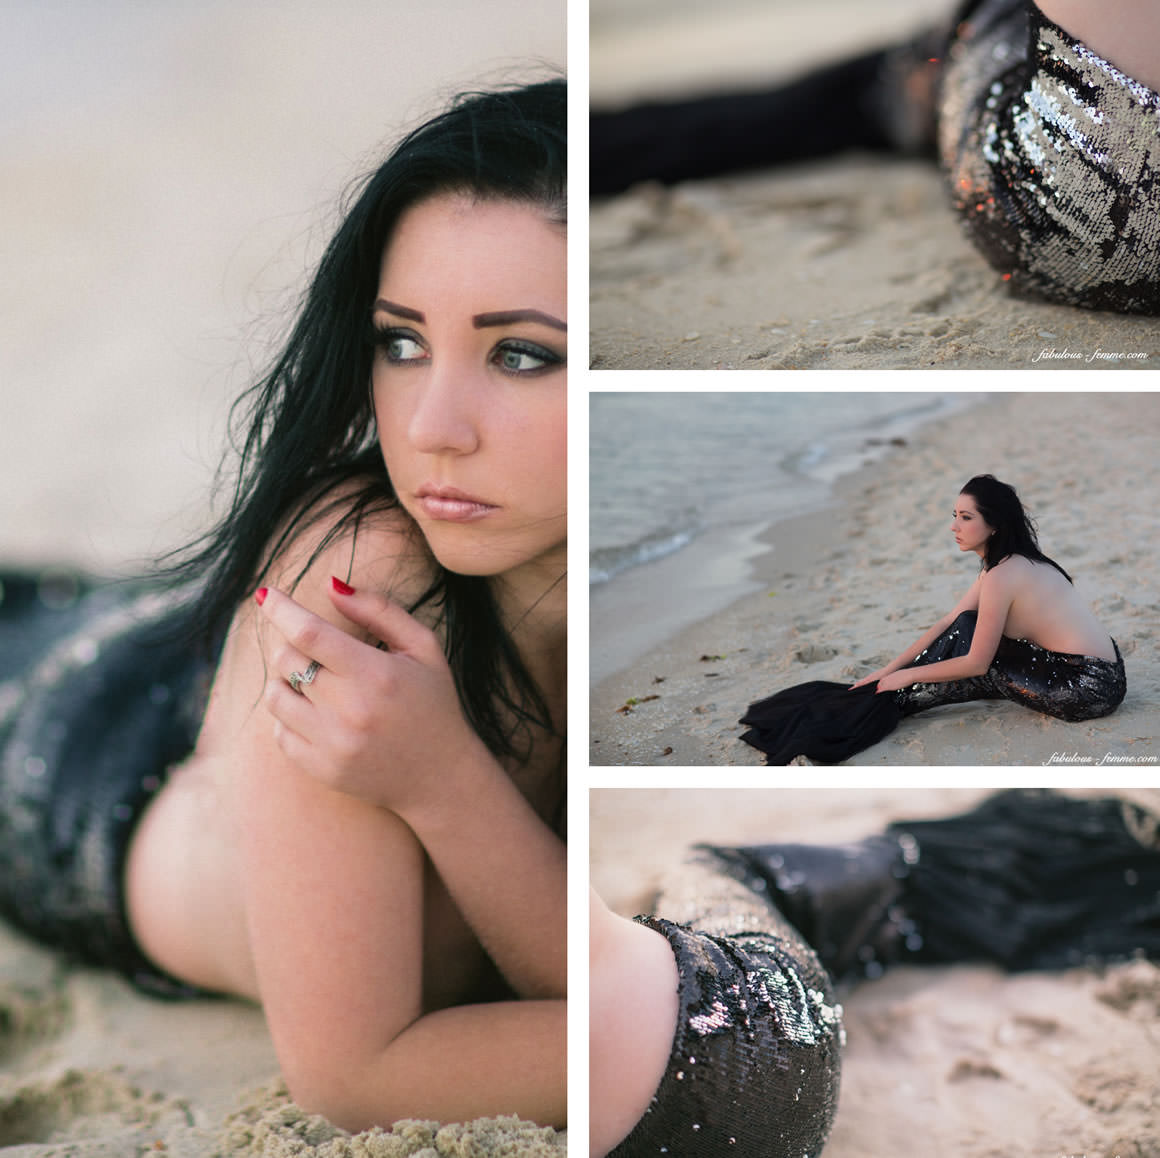 photographing mermaids at the beach